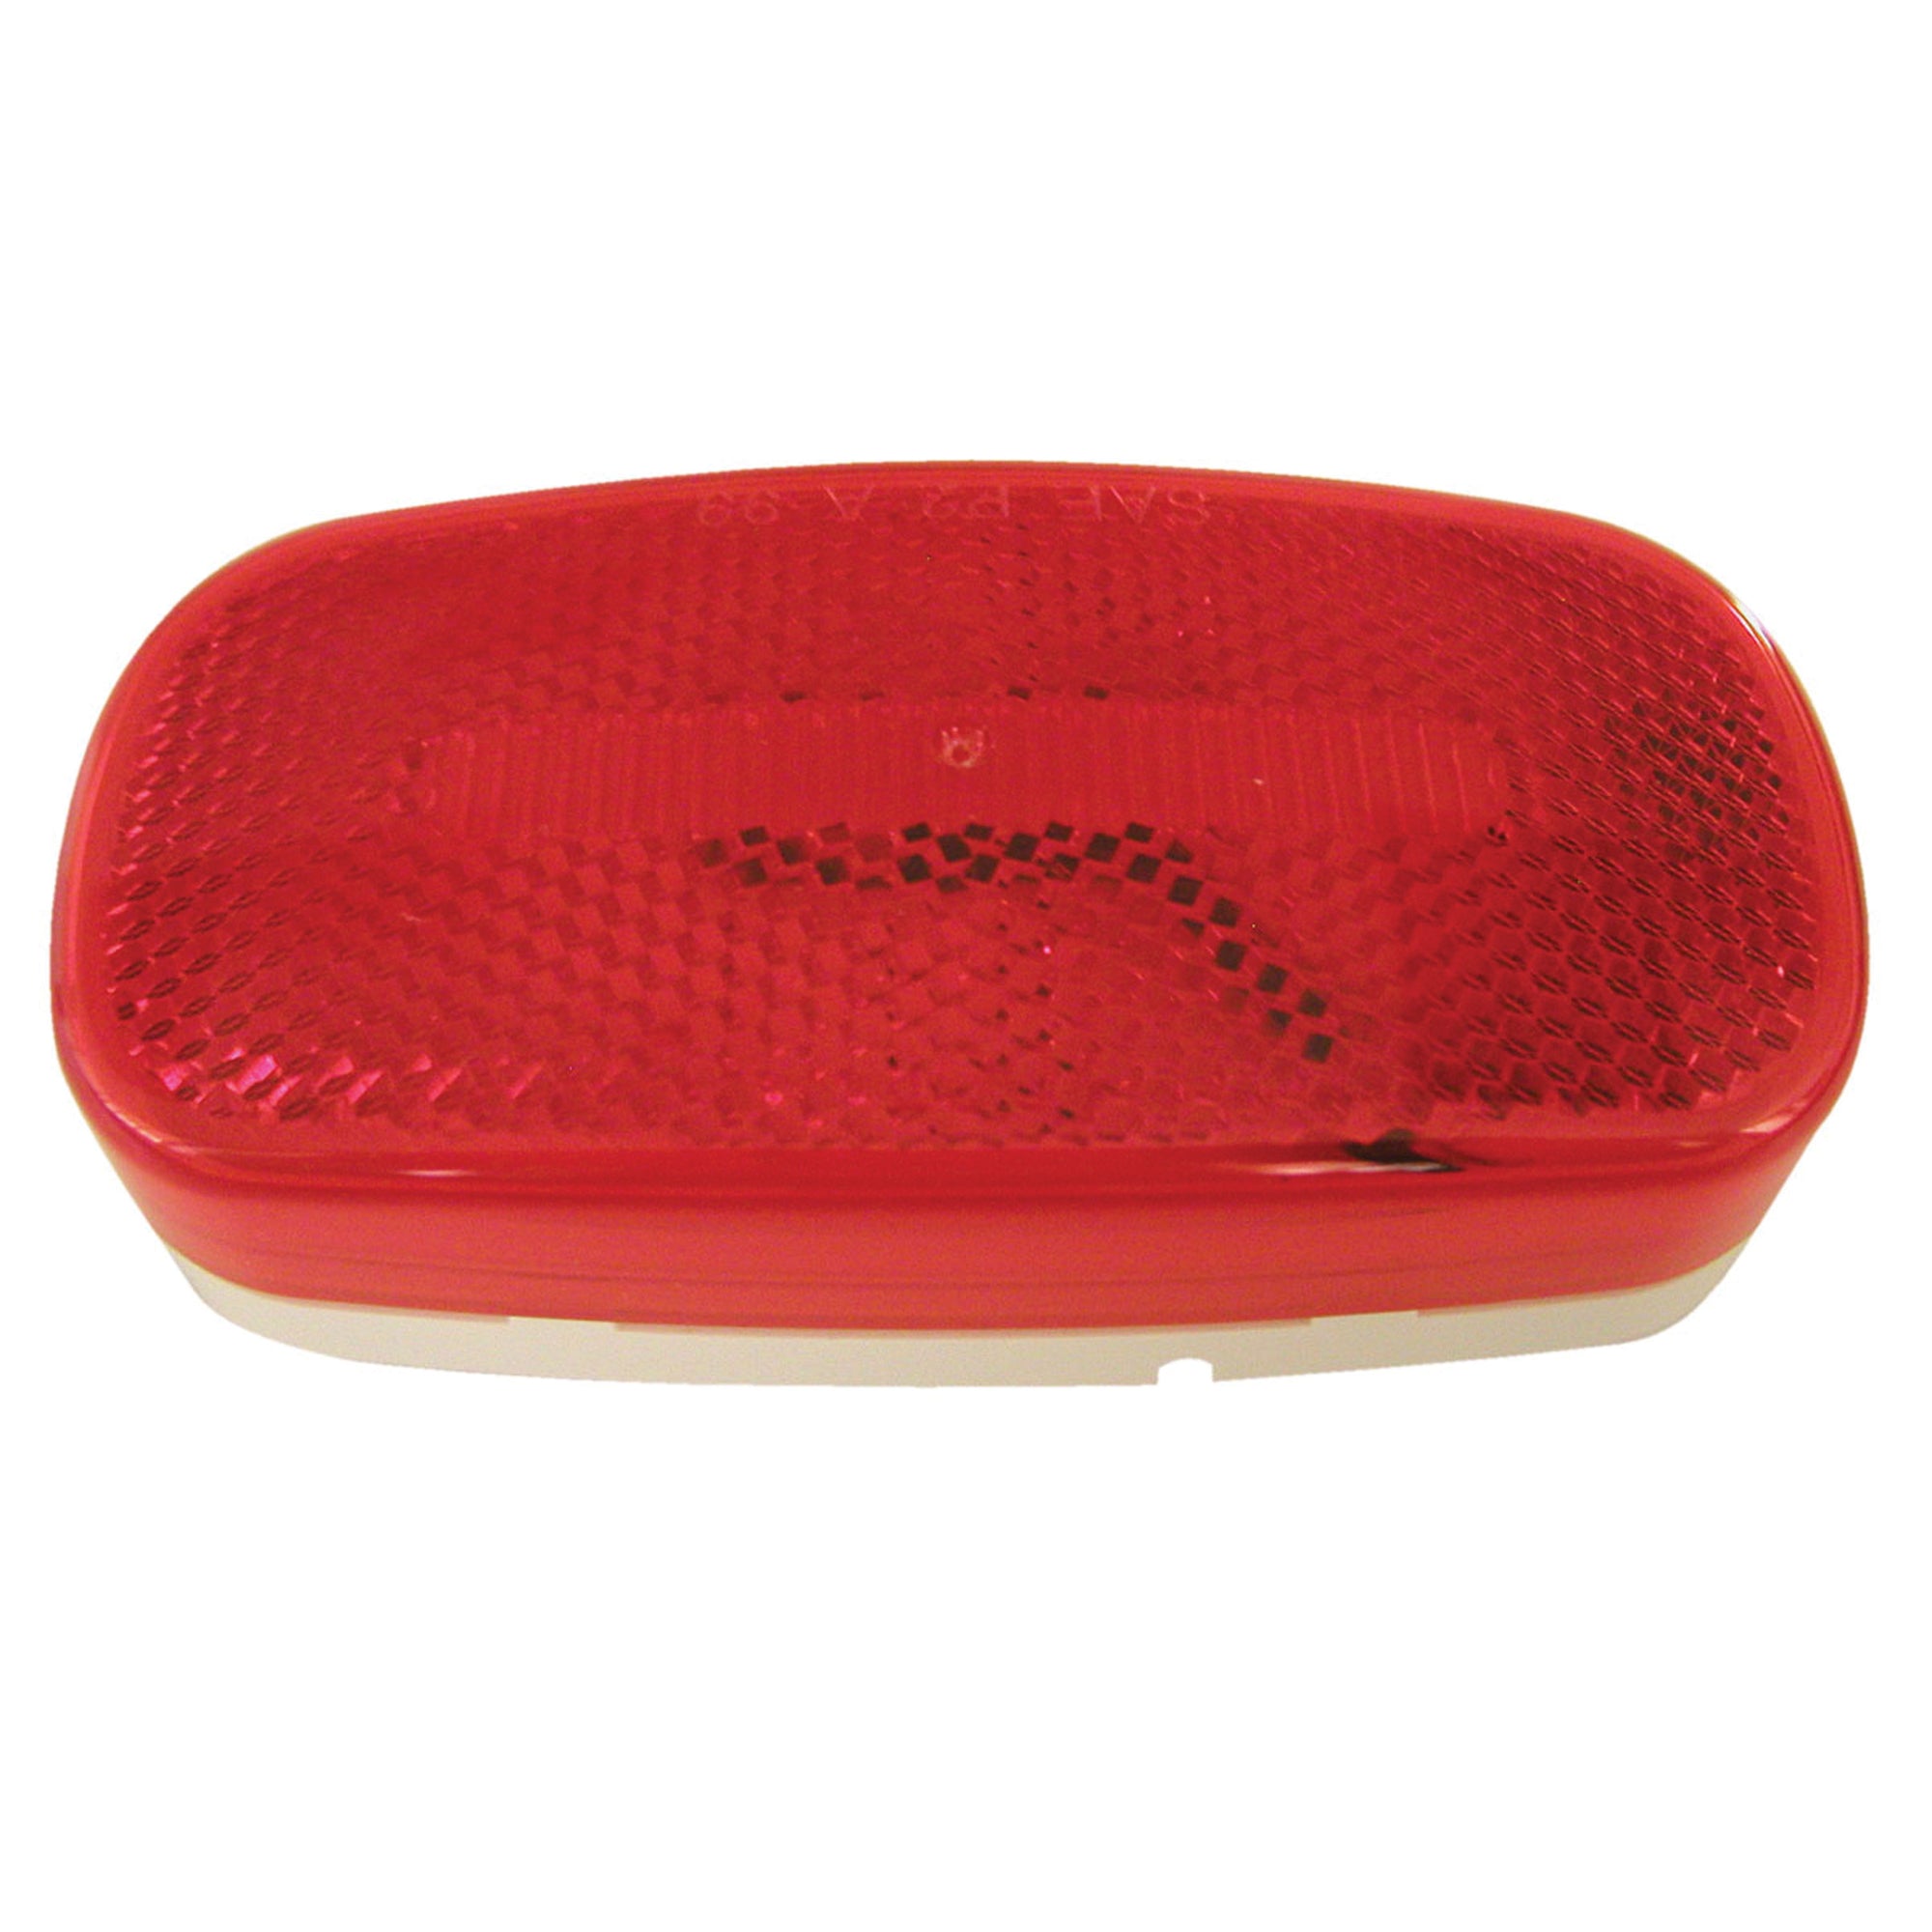 Peterson V180R The 180 Series Piranha LED Oval Clearance/Side Marker Light With Reflex - Red